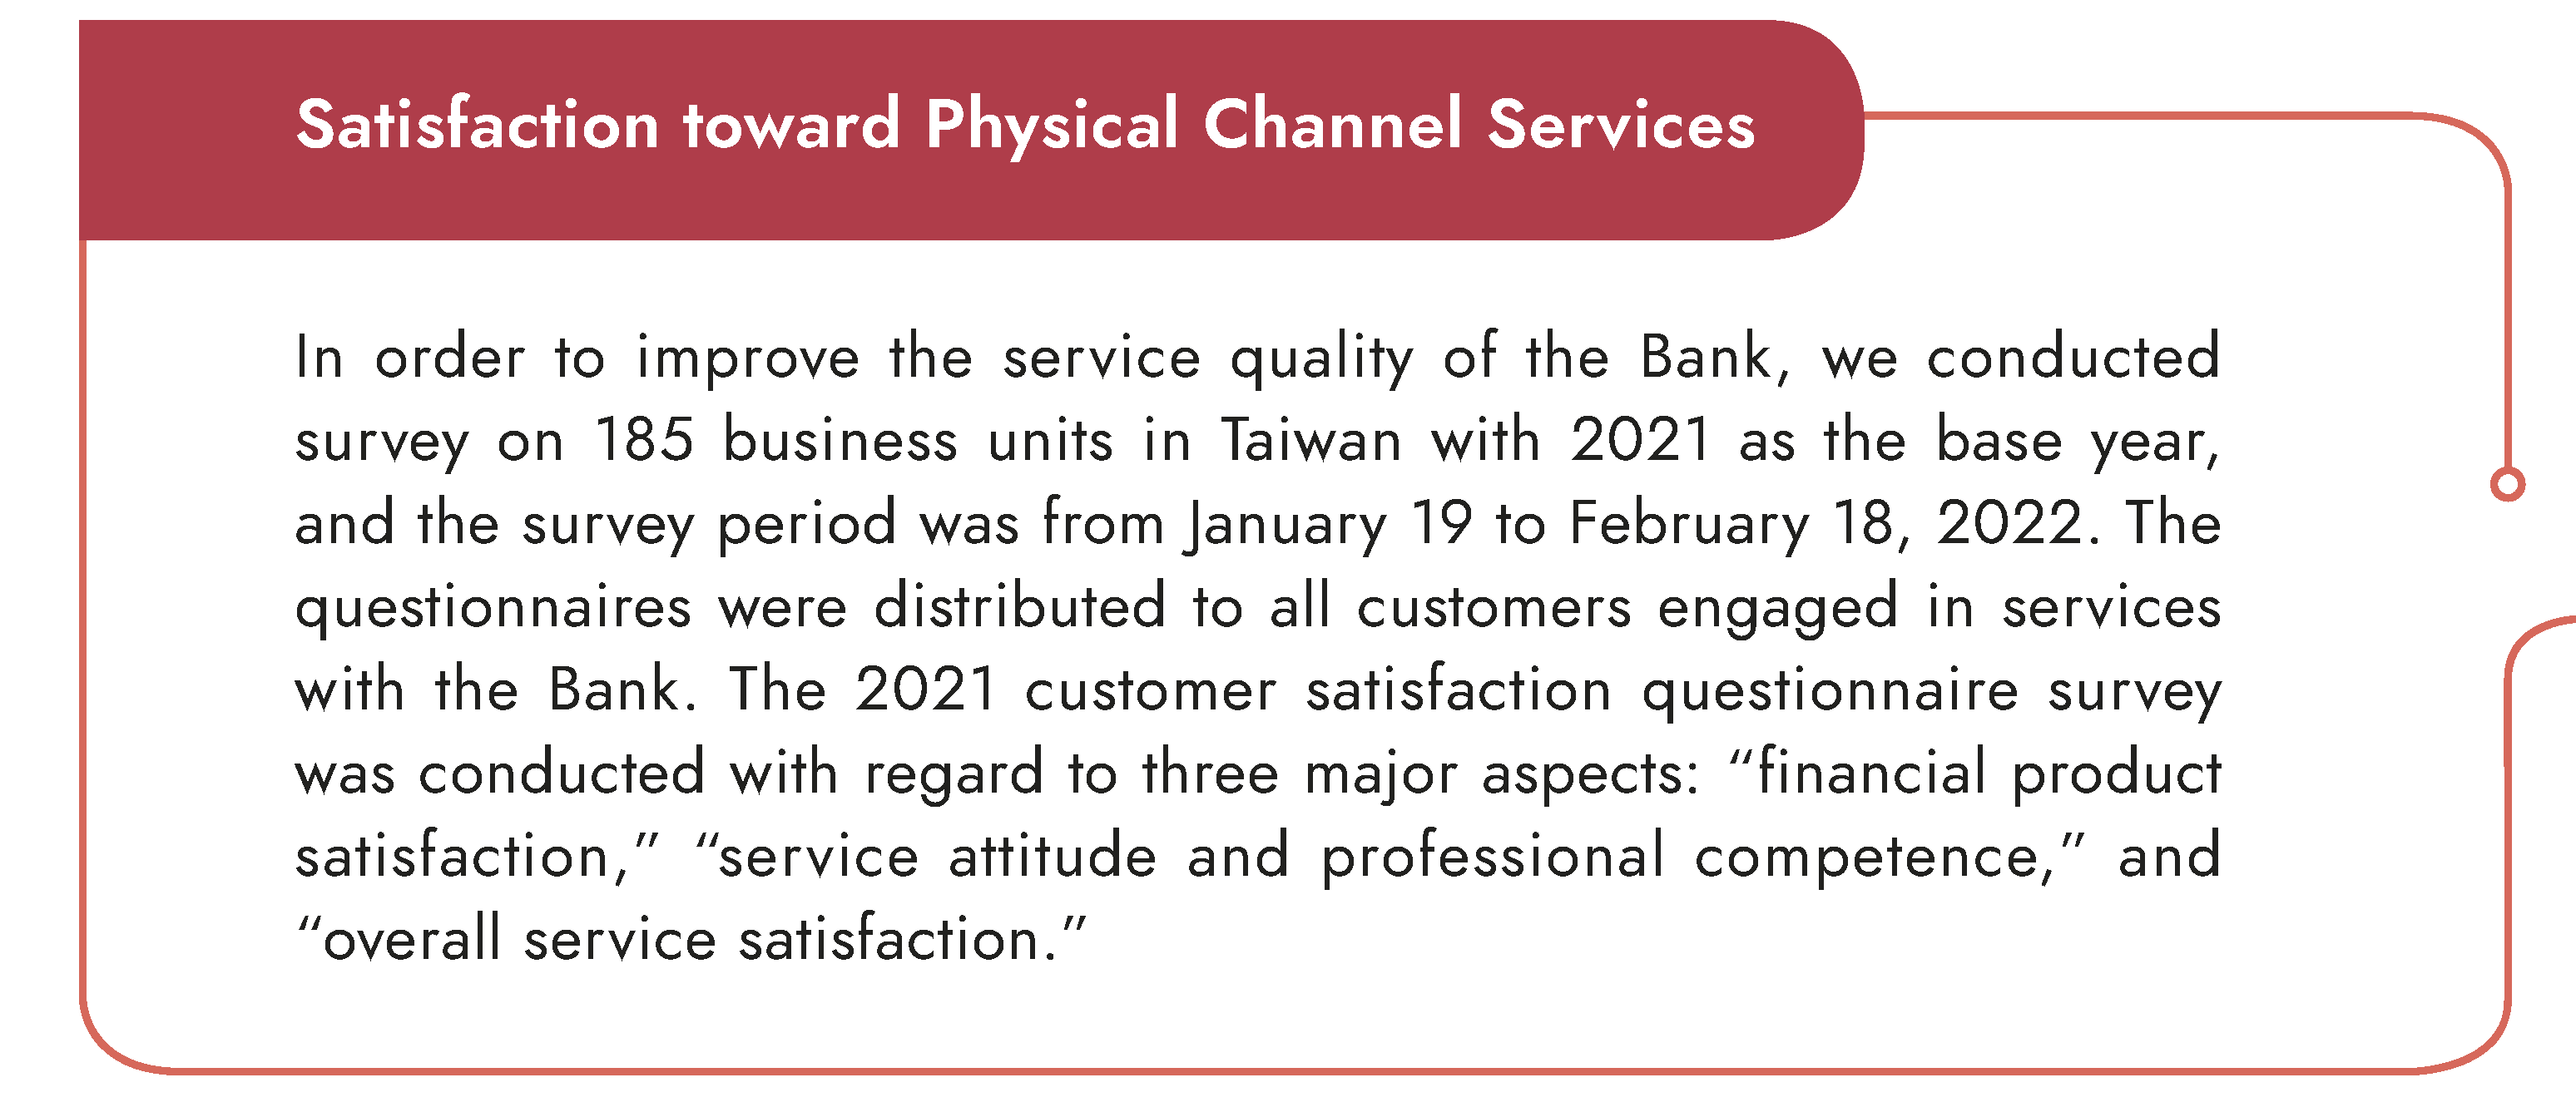 Satisfaction toward Physical Channel Services